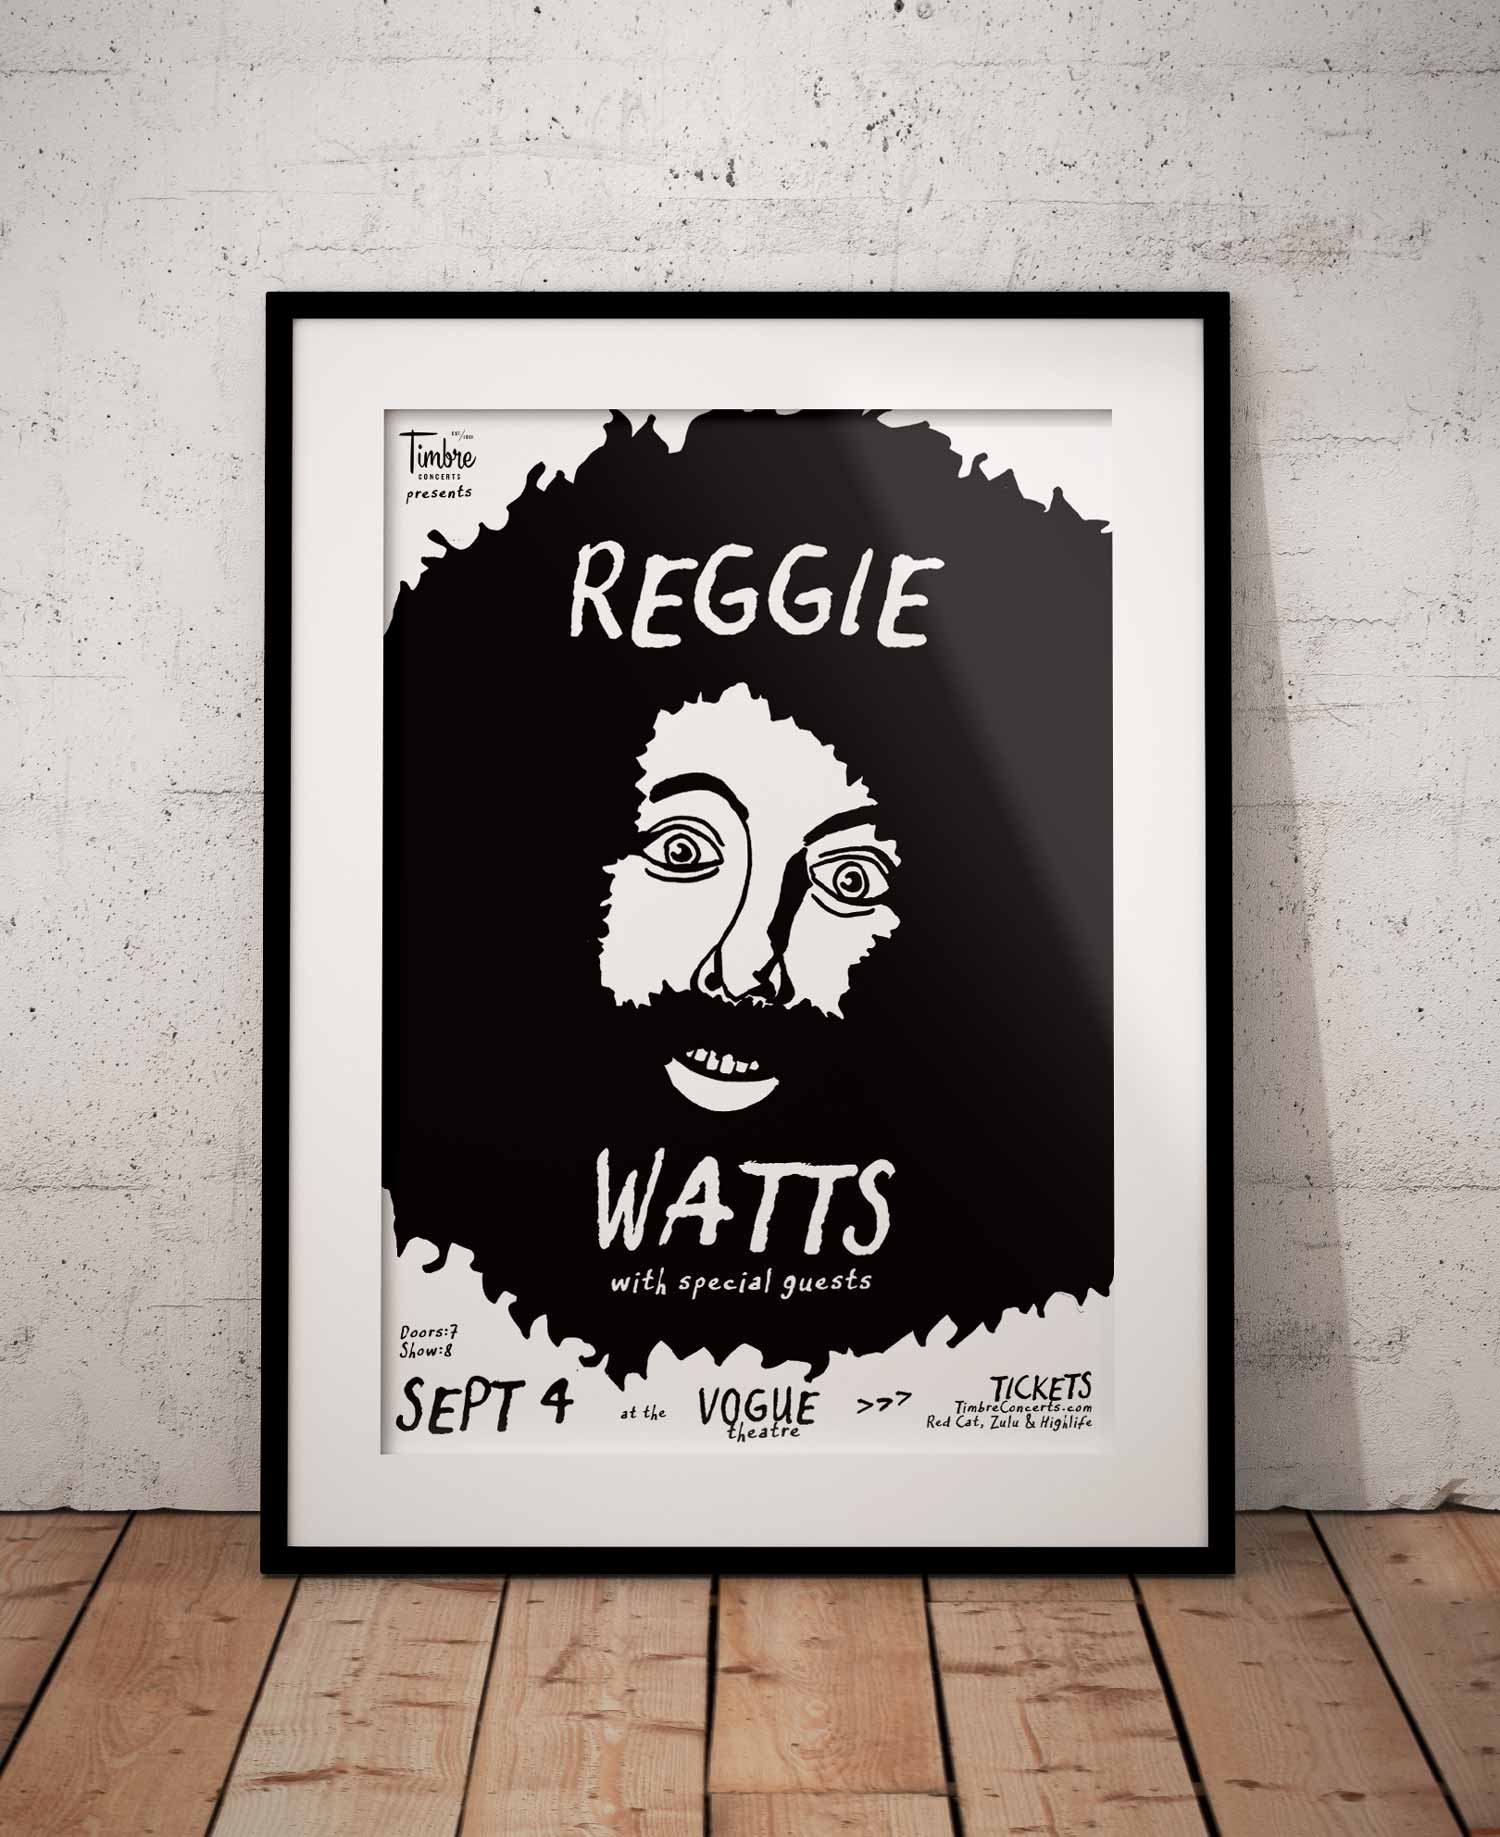 Illustration and graphic design for comedian and musician Reggie Watts